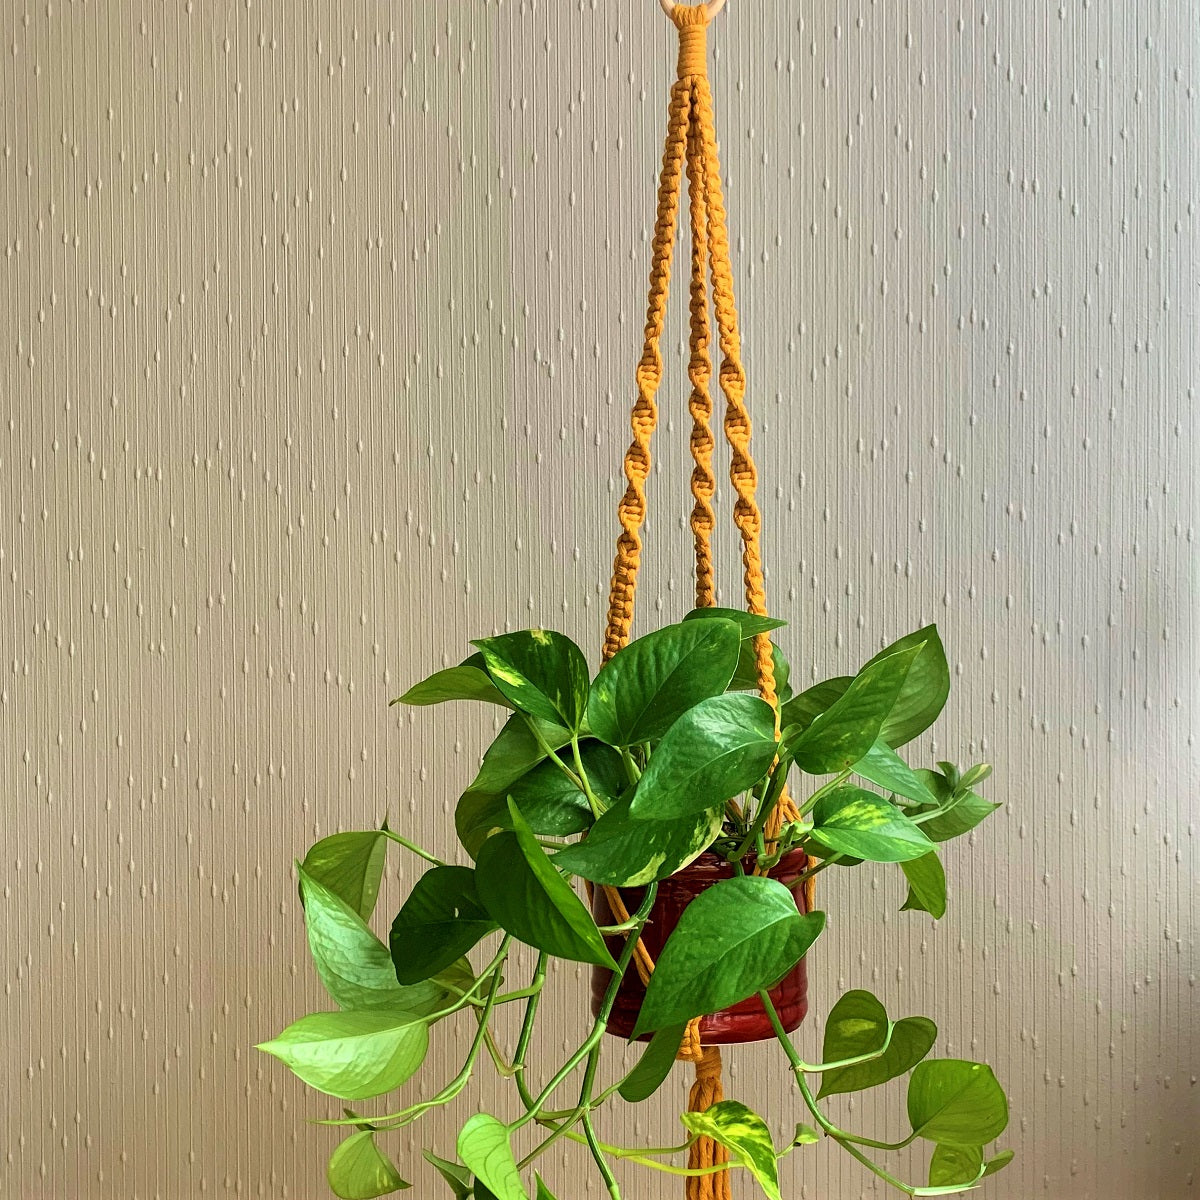 A minimalist yellow macrame plant hanger with a golden pothos in a maroon planter